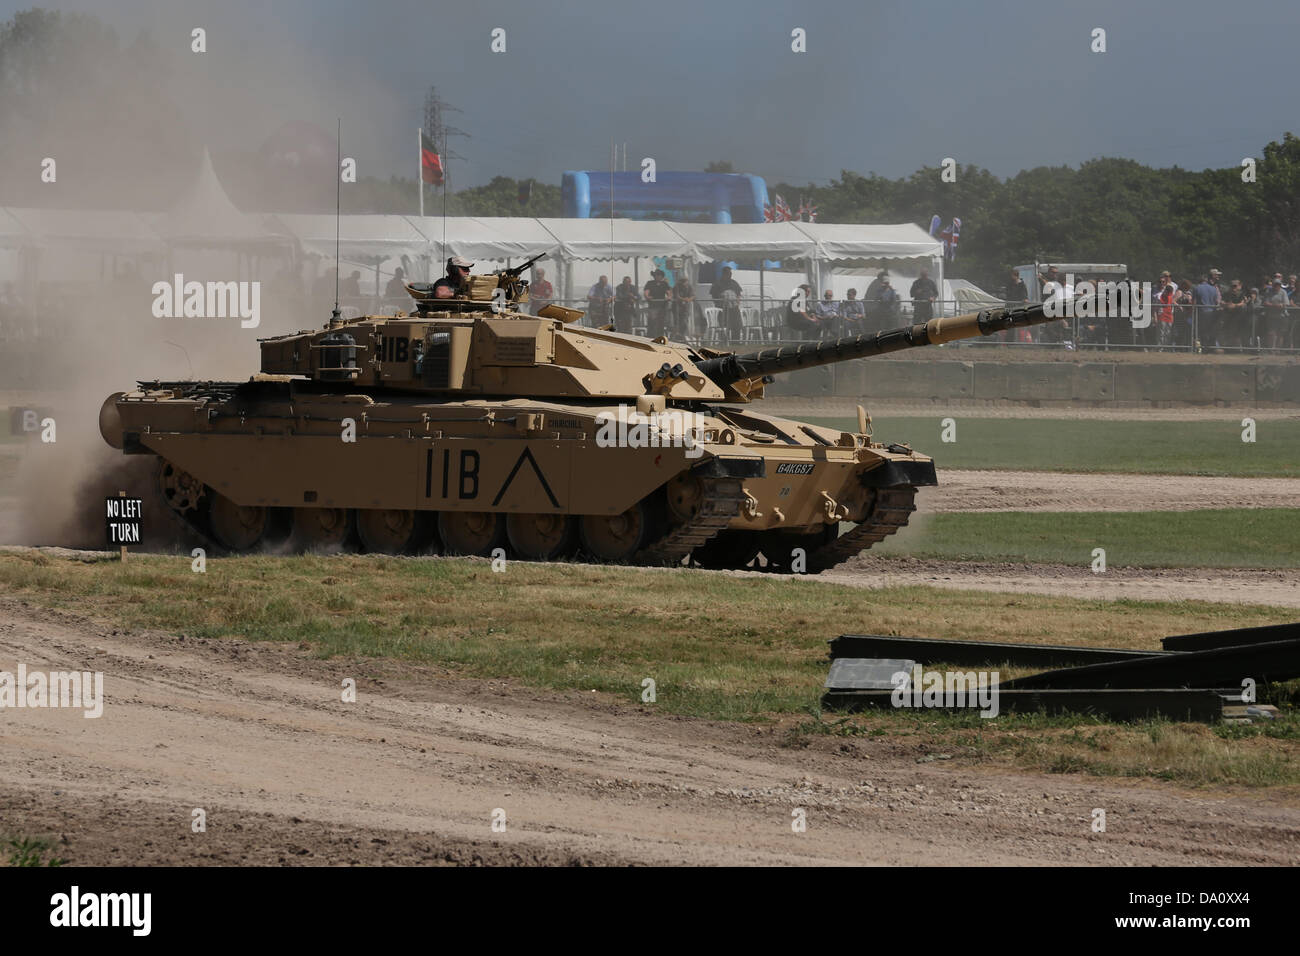 Bovington, UK. 29th June, 2013. The Merkava (Hebrew:  Chariot) is a main battle tank used by the Israel Defense Forces and is seen here at Tankfest 2013. The tank began development in 1973 and entered official service in 1979. Four main versions of the tank have been deployed. It was first used extensively in the 1982 Lebanon War. The name 'Merkava' was derived from the IDF's initial development program name. Stock Photo